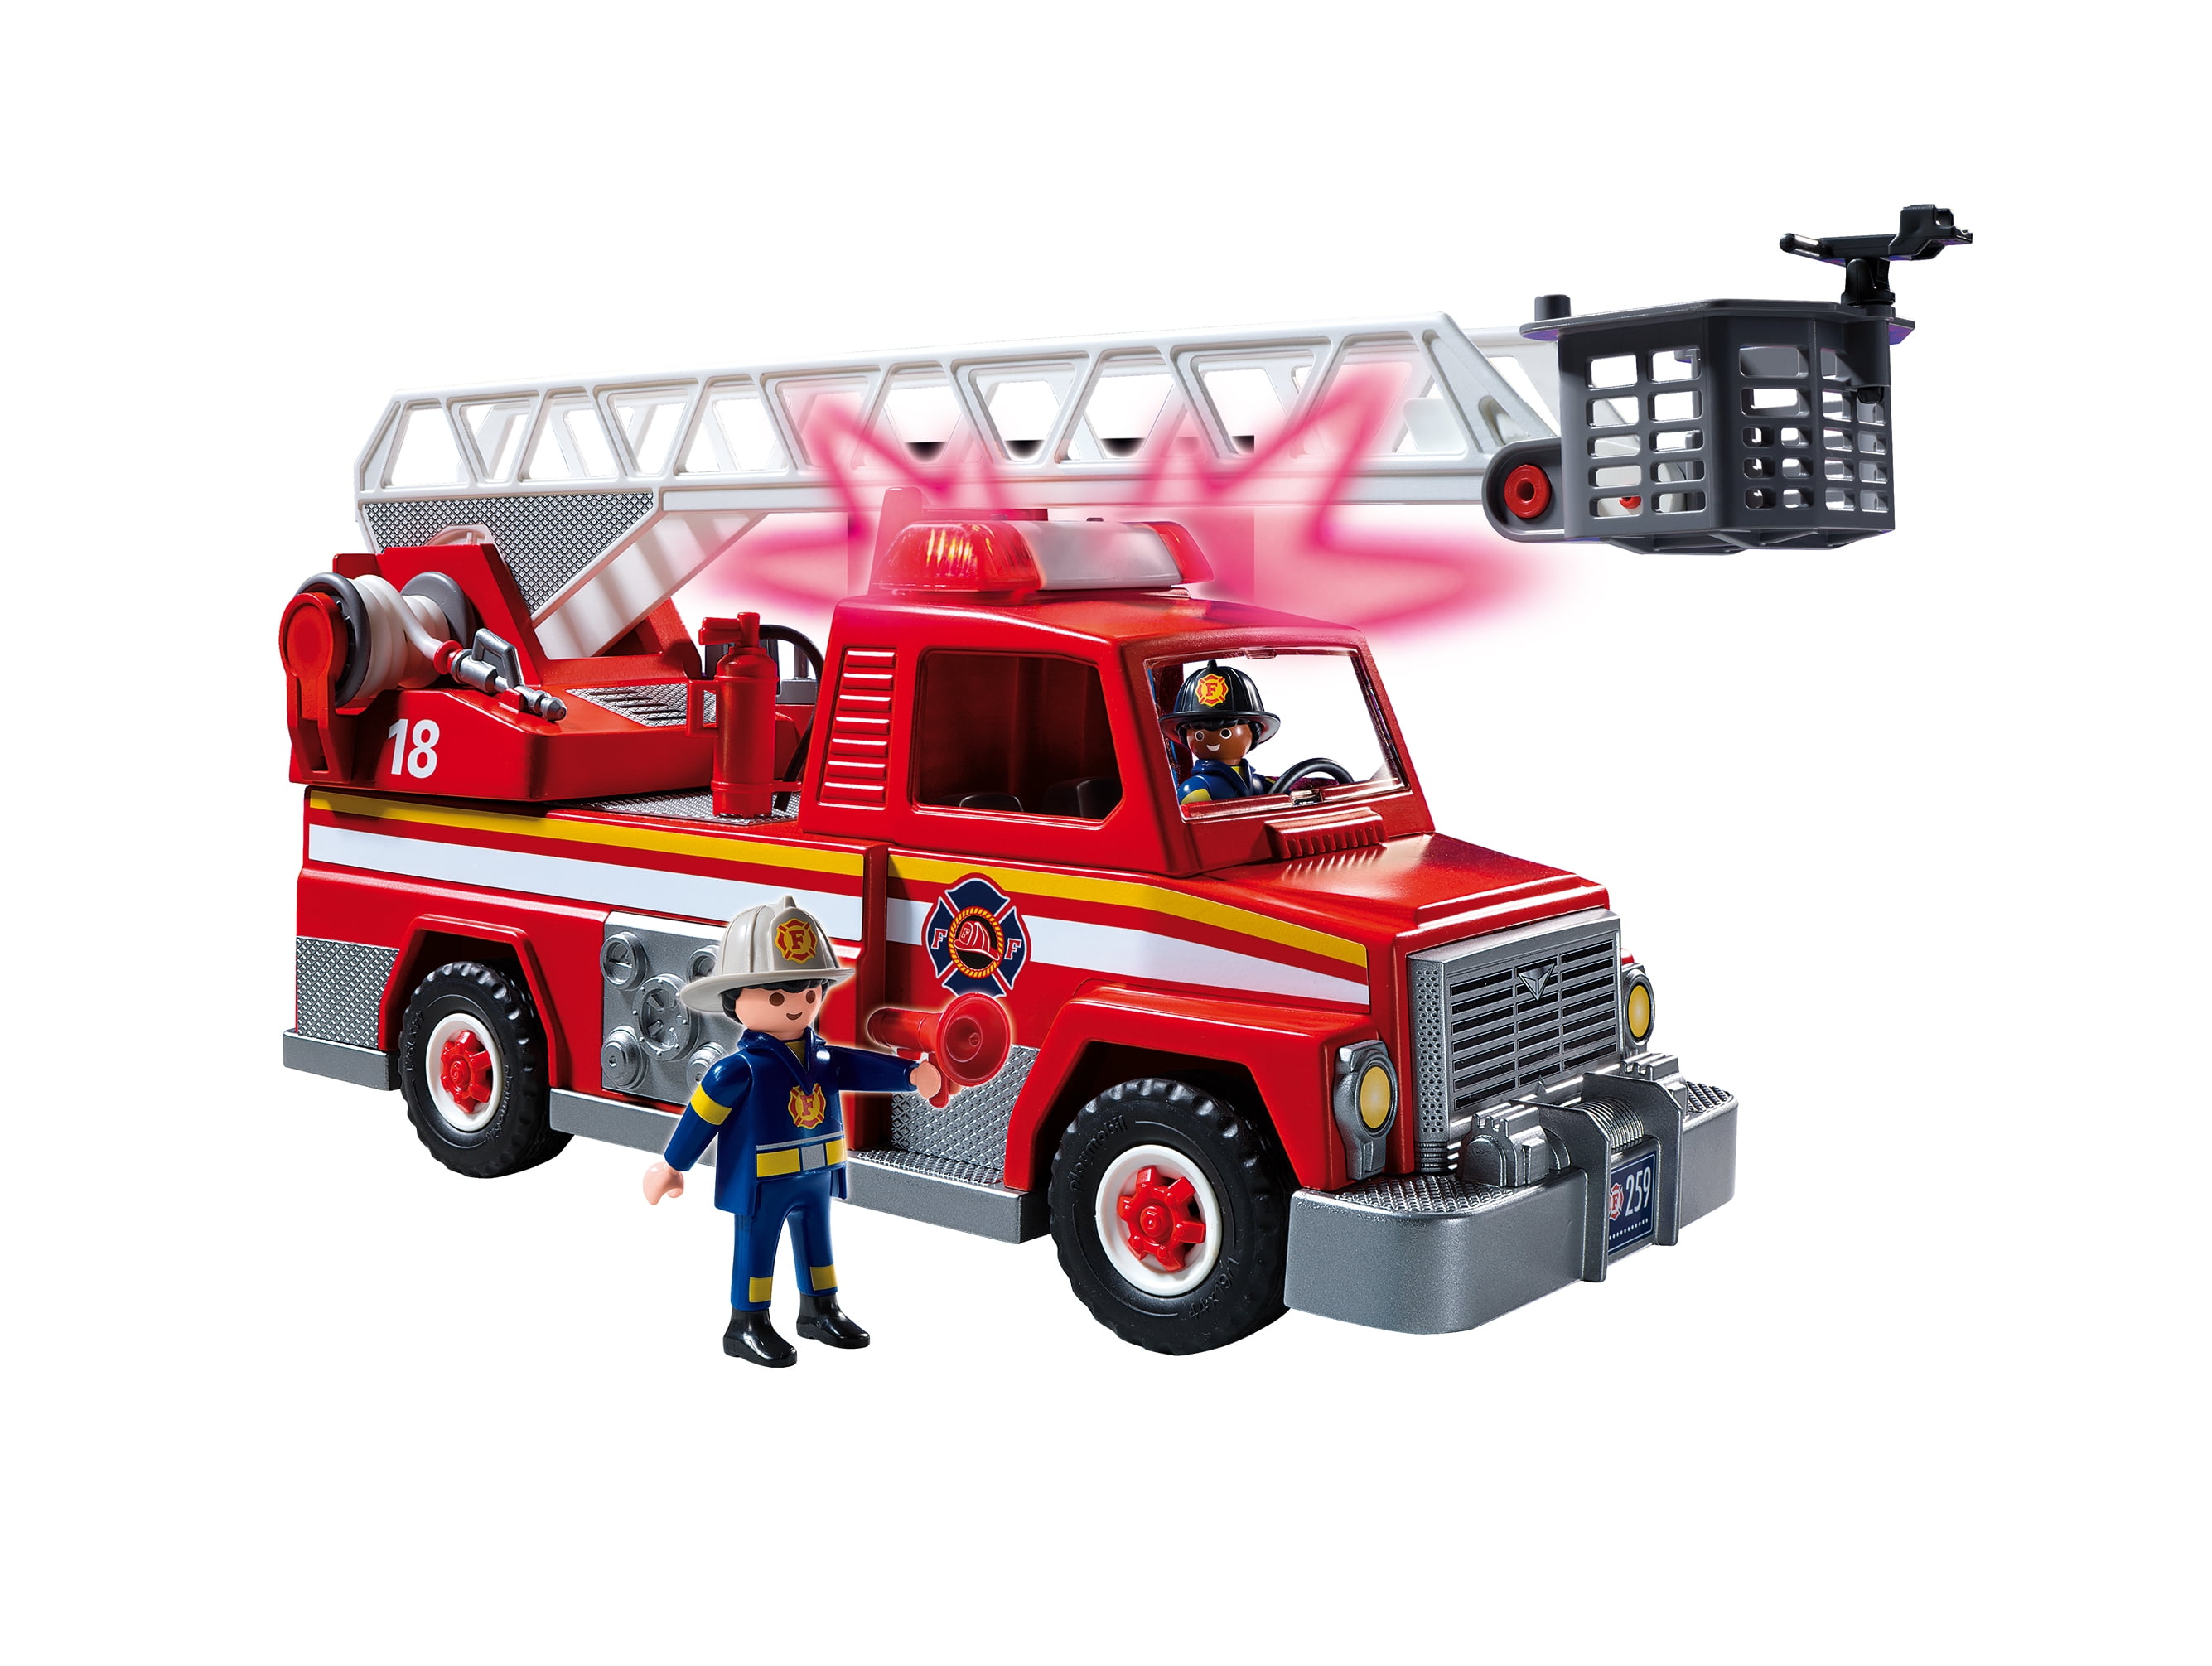 PLAYMOBIL Water Rescue with Dog Action Figure Set, 29 Pieces